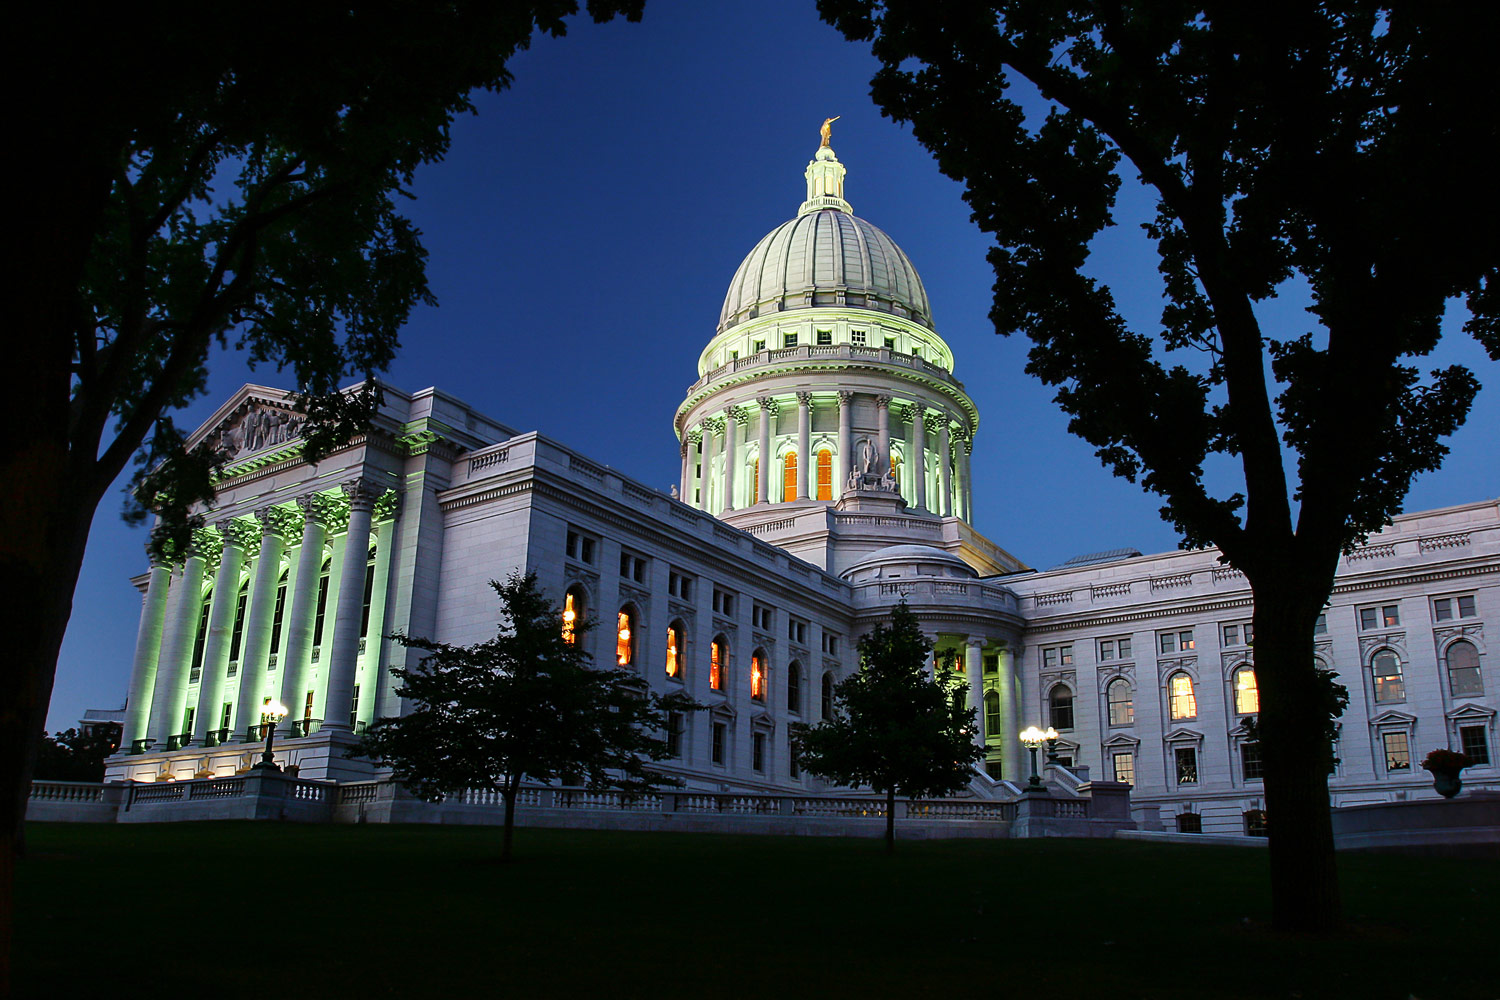 The Wisconsin State Capitol just after its lights came on in Madison, Wisconsin.&nbsp;→ Buy a Print&nbsp;or License Photo